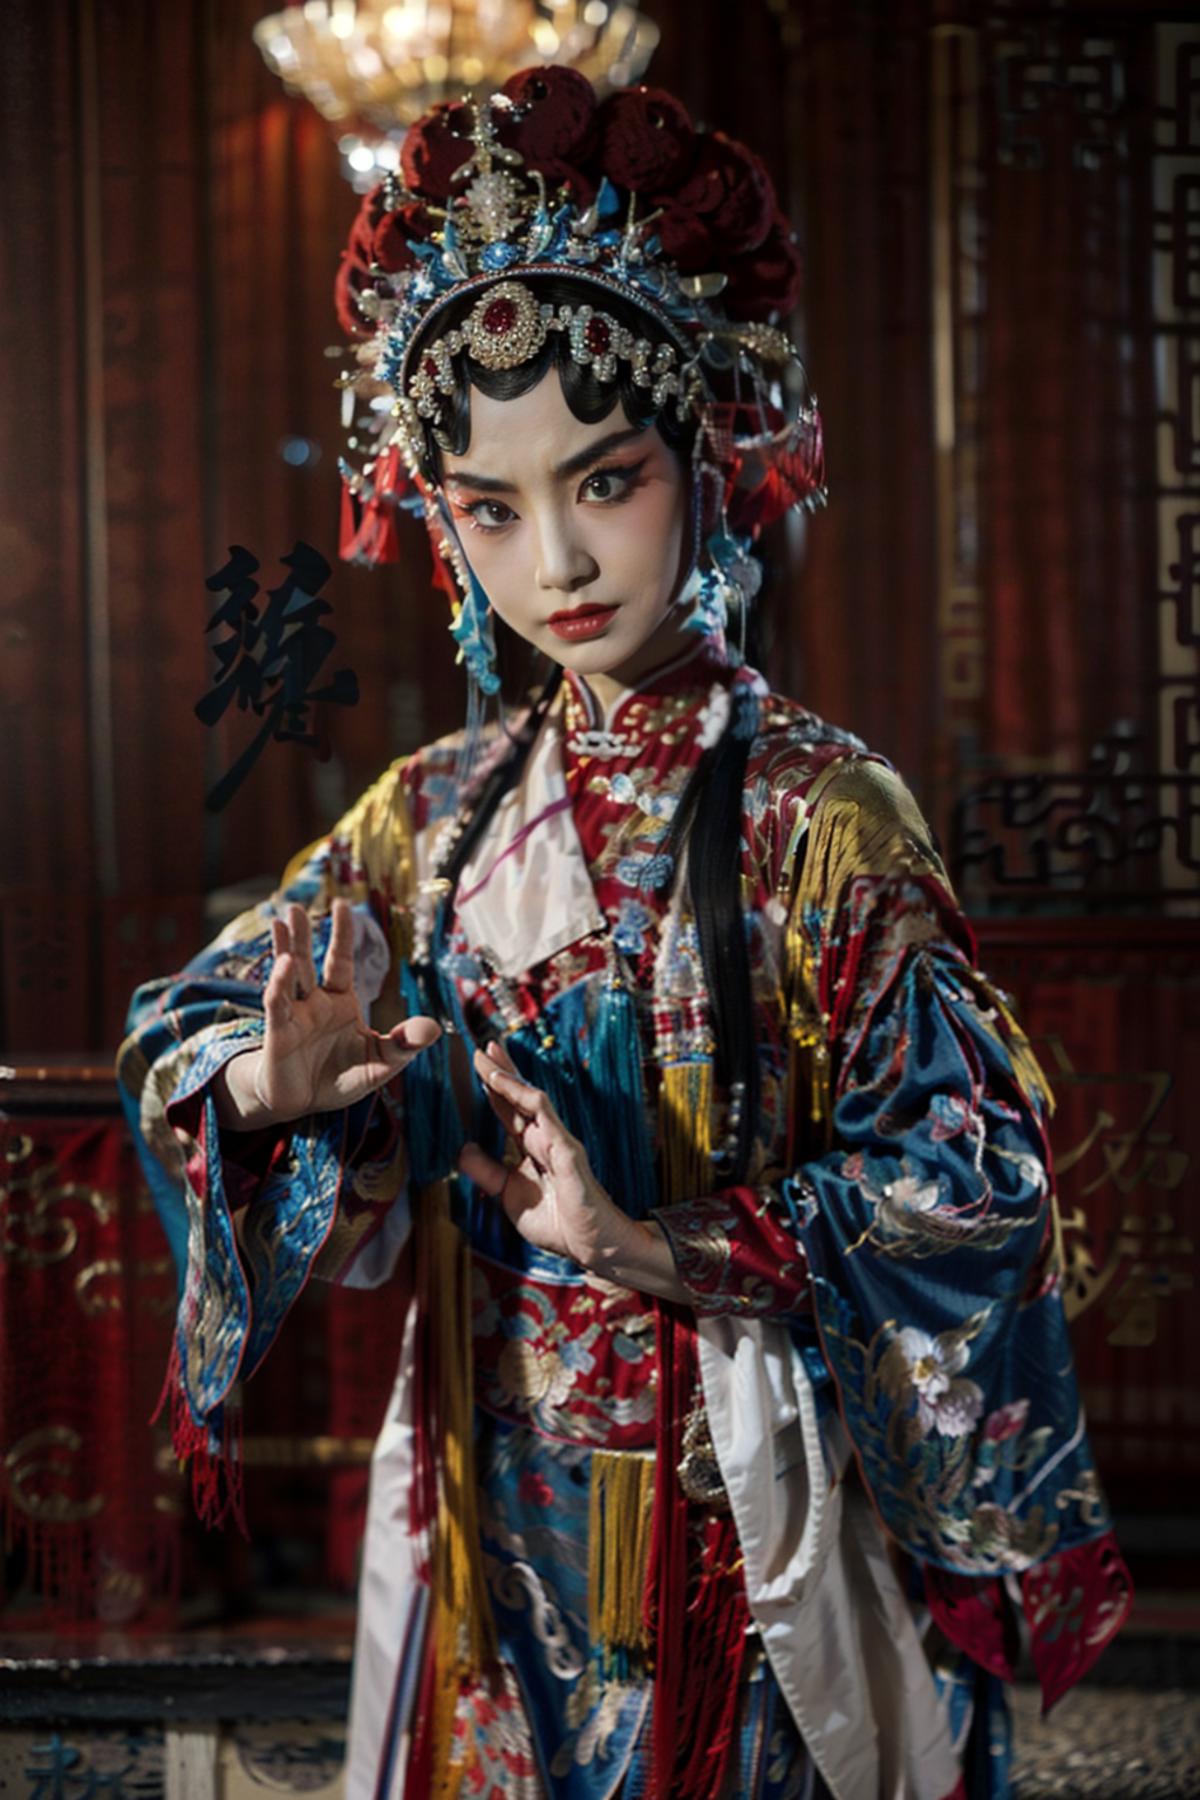 A woman in a traditional Chinese dress with red hair.